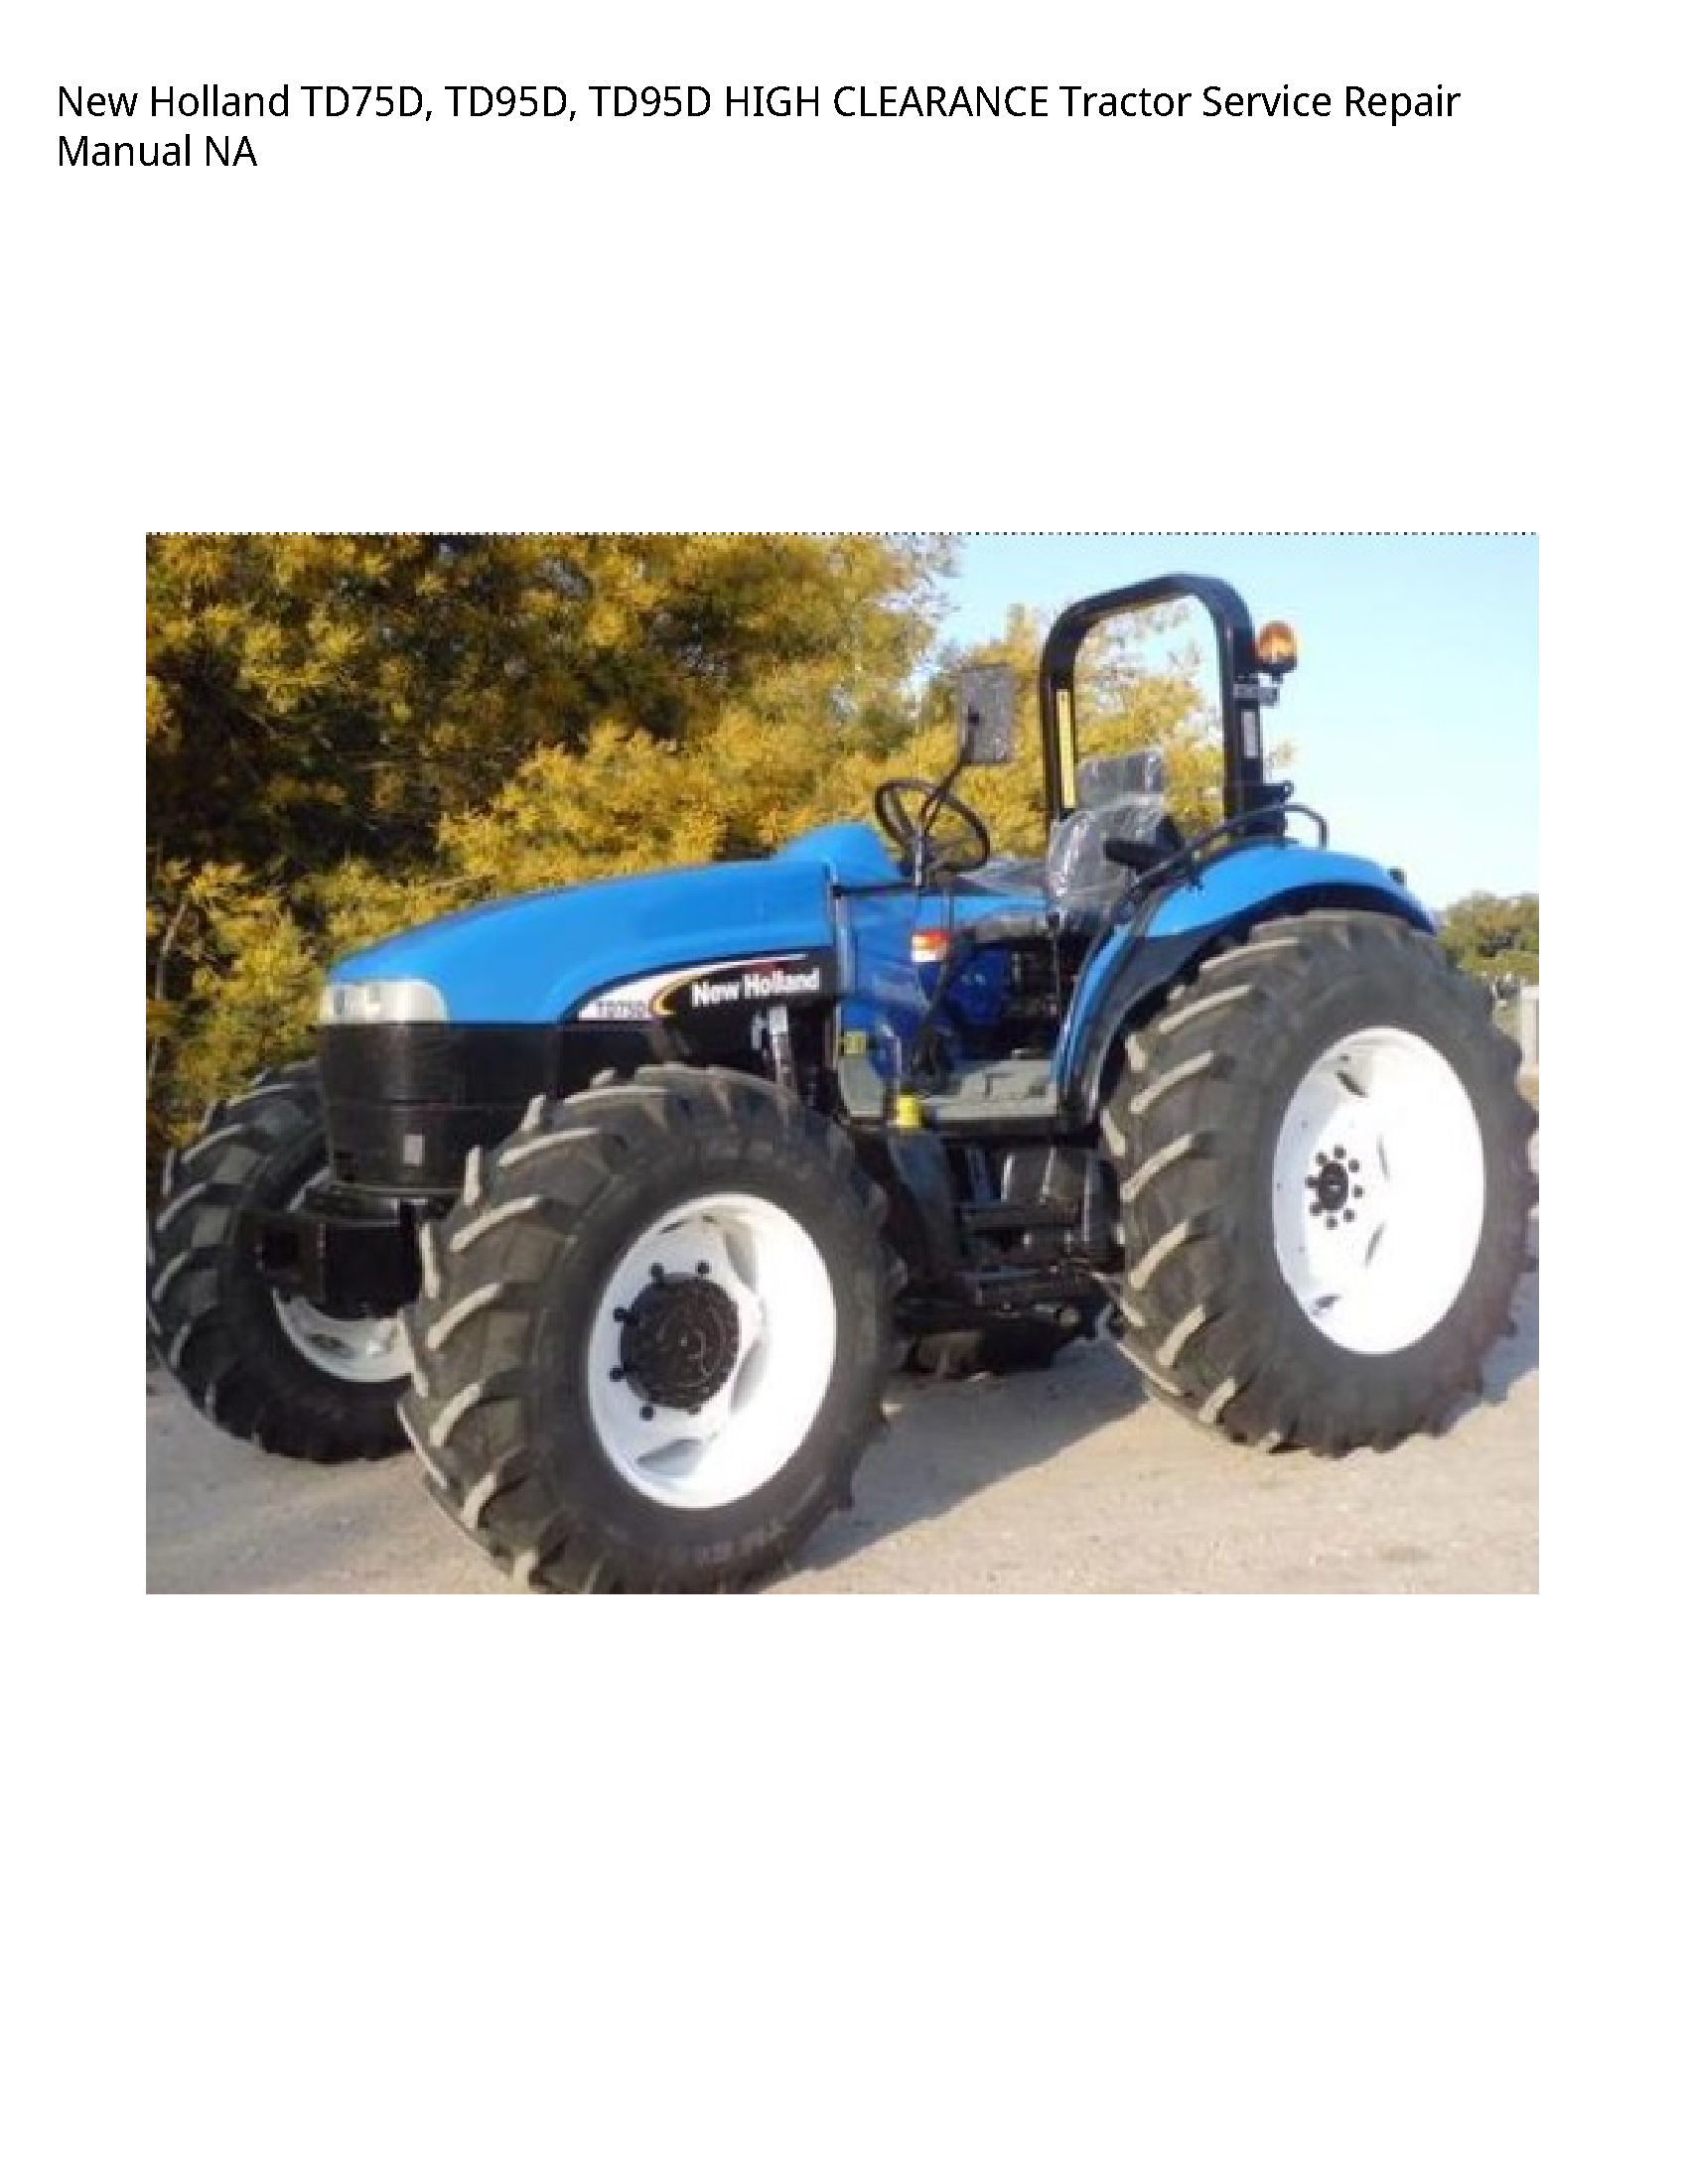 New Holland TD75D HIGH CLEARANCE Tractor manual